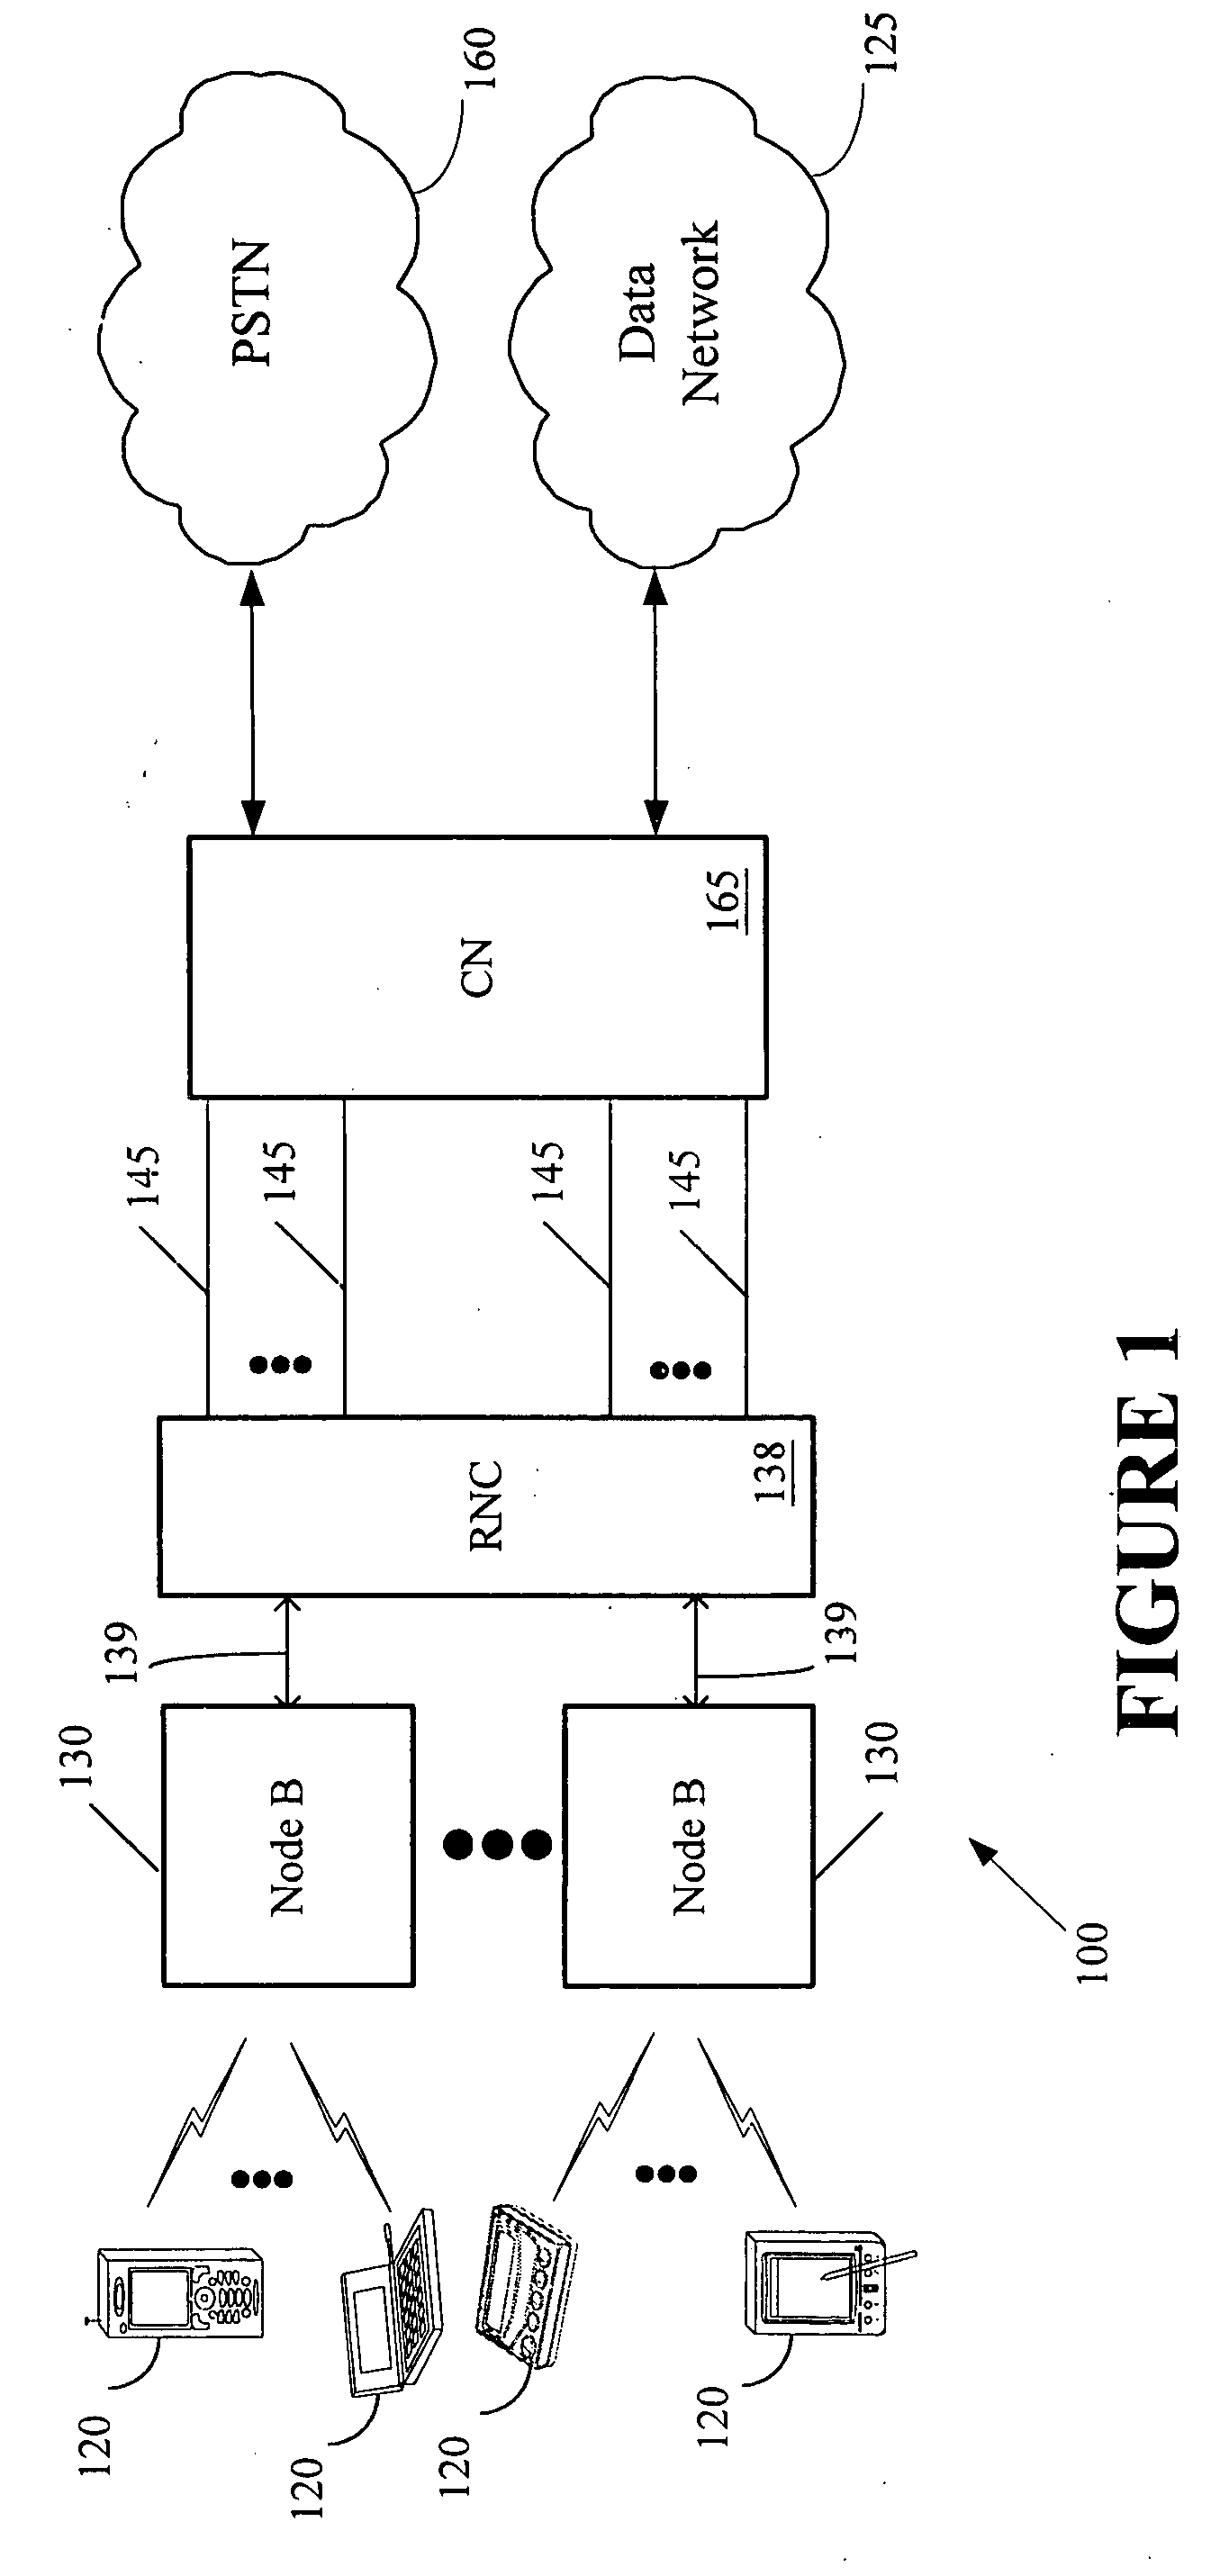 Method and apparatus for link error prediction in a communication system